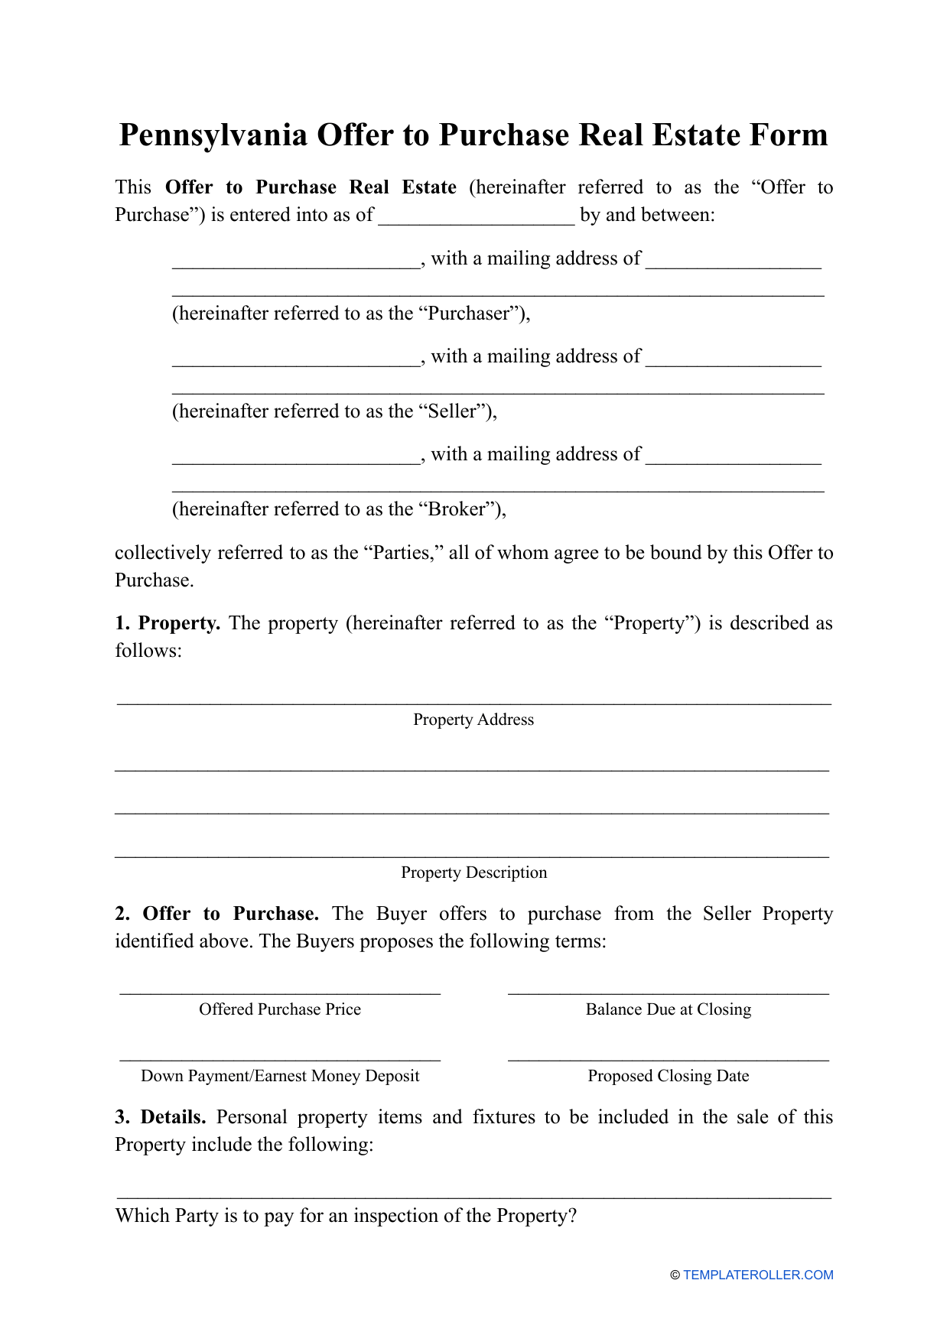 Offer to Purchase Real Estate Form - Pennsylvania, Page 1